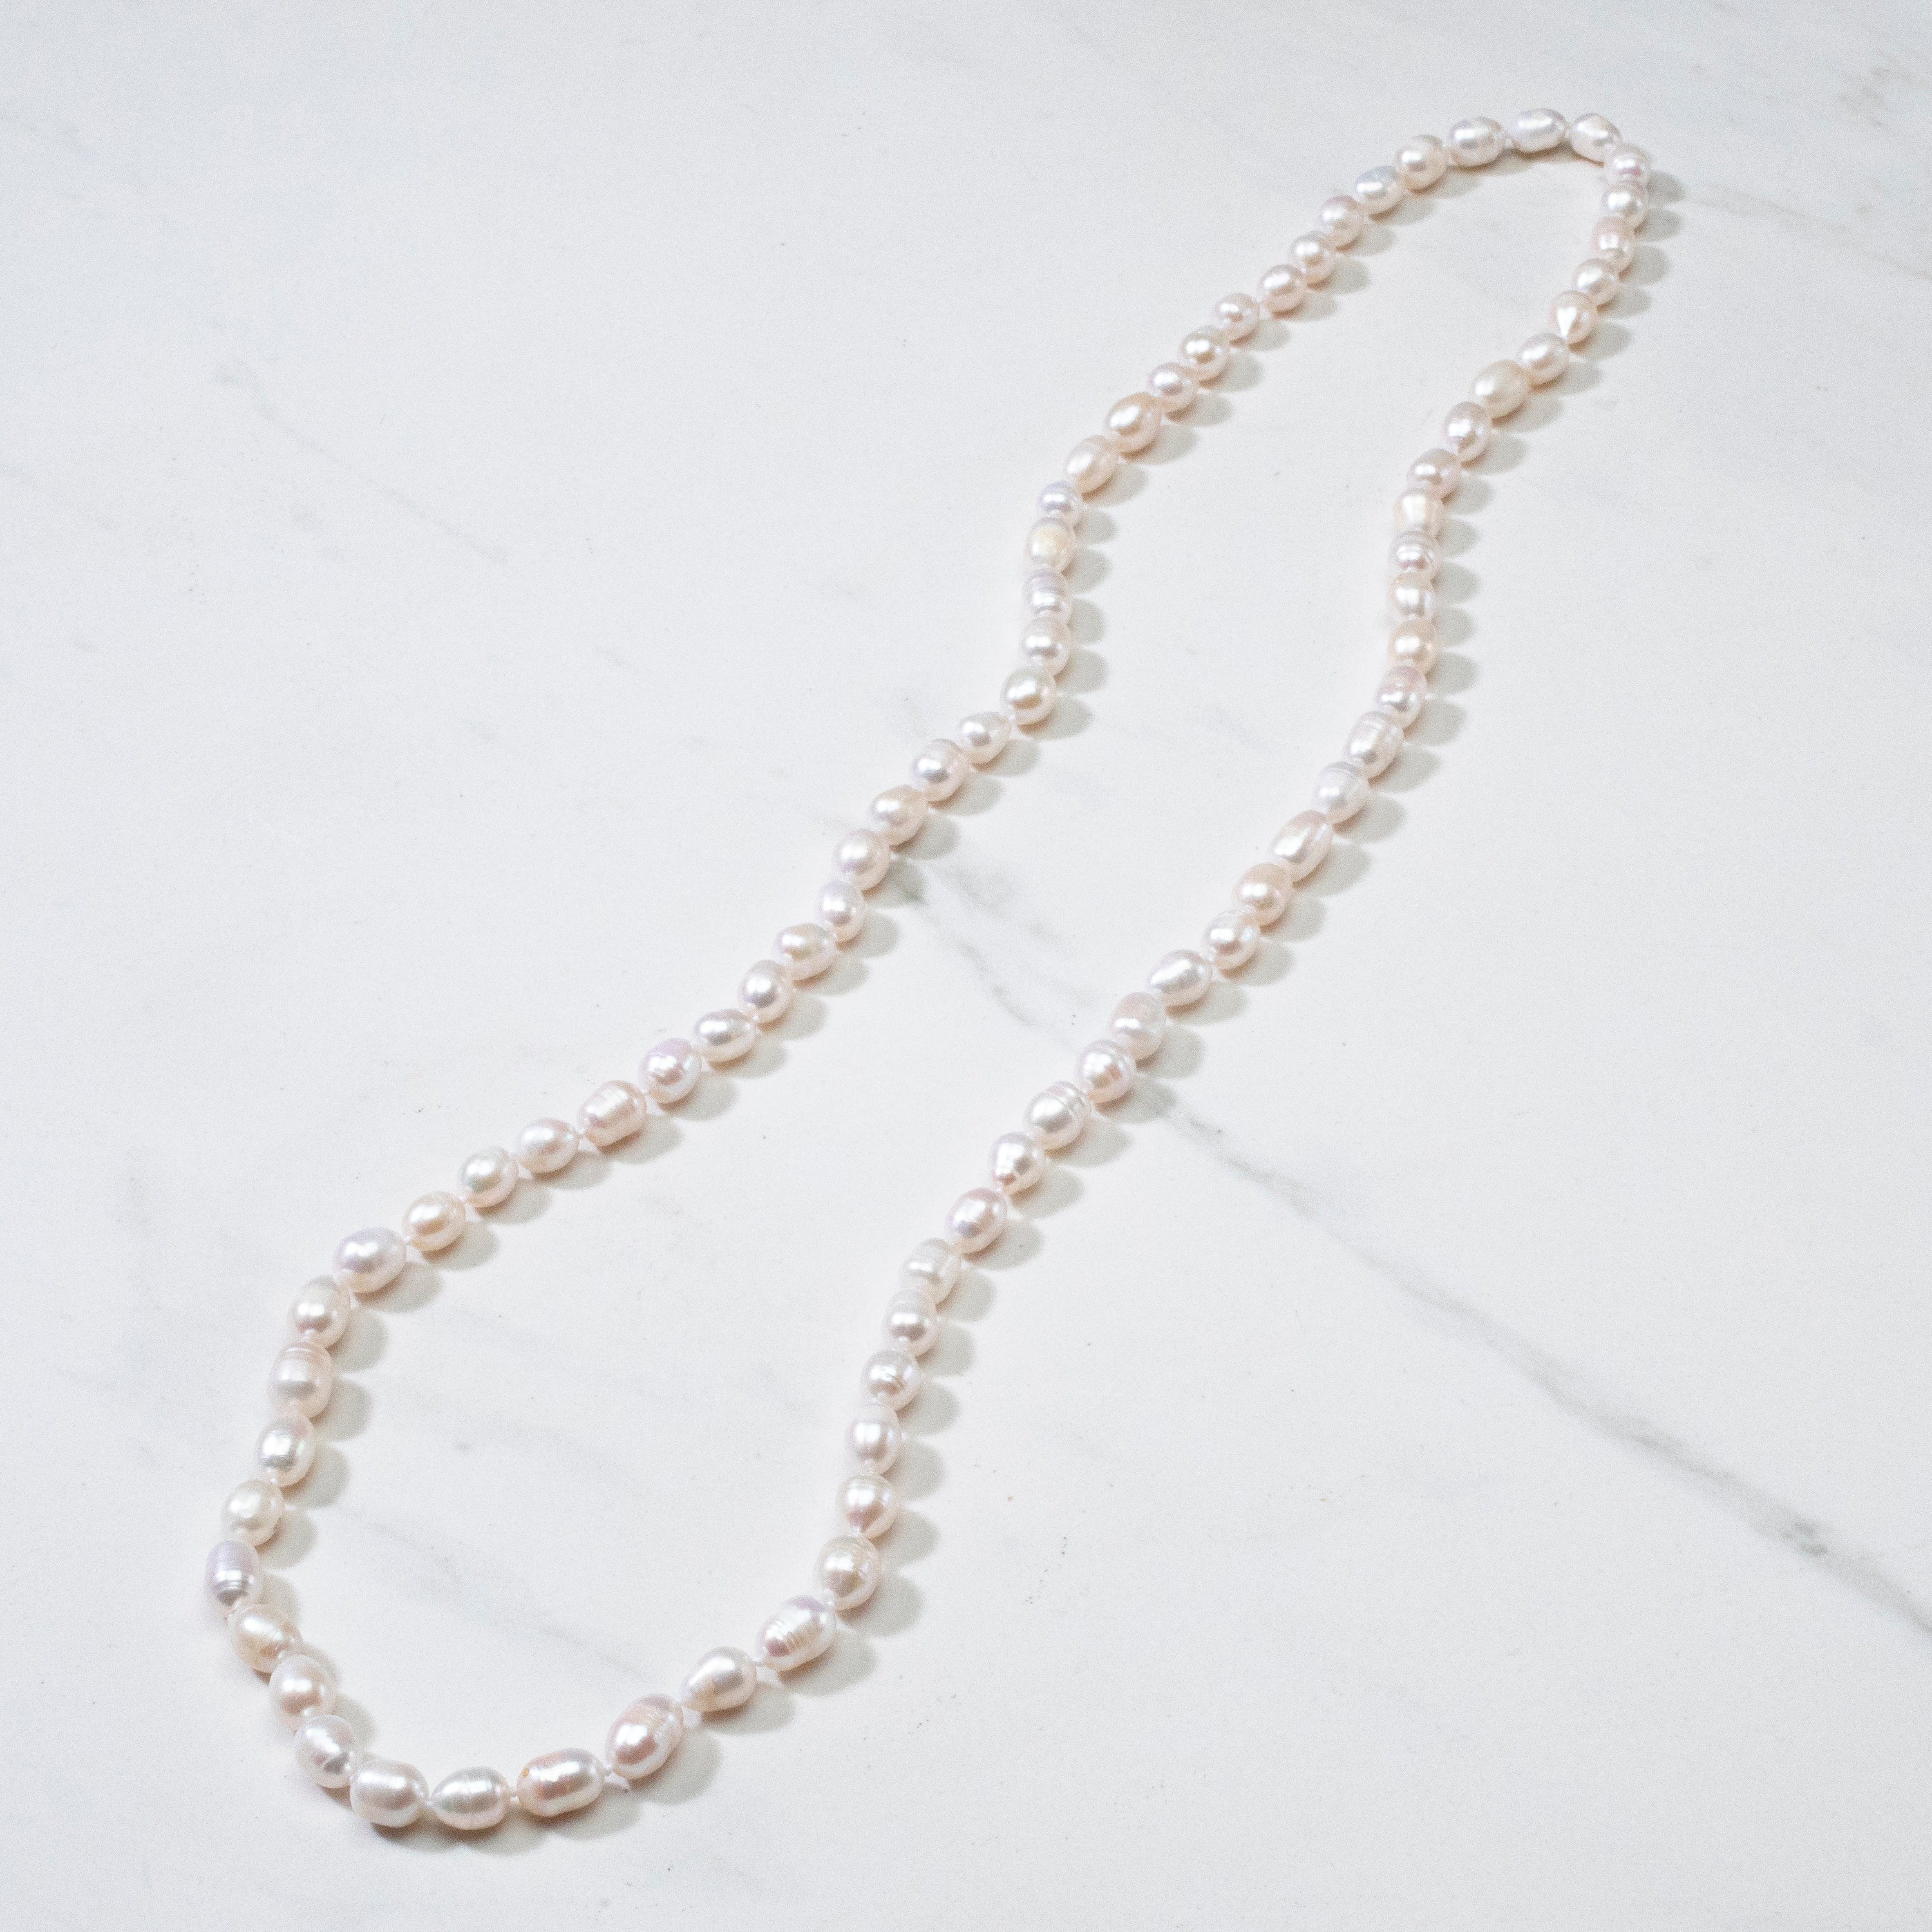 KALIFANO Jewelry 37” Freshwater Pearl Necklace TS-NGP-37